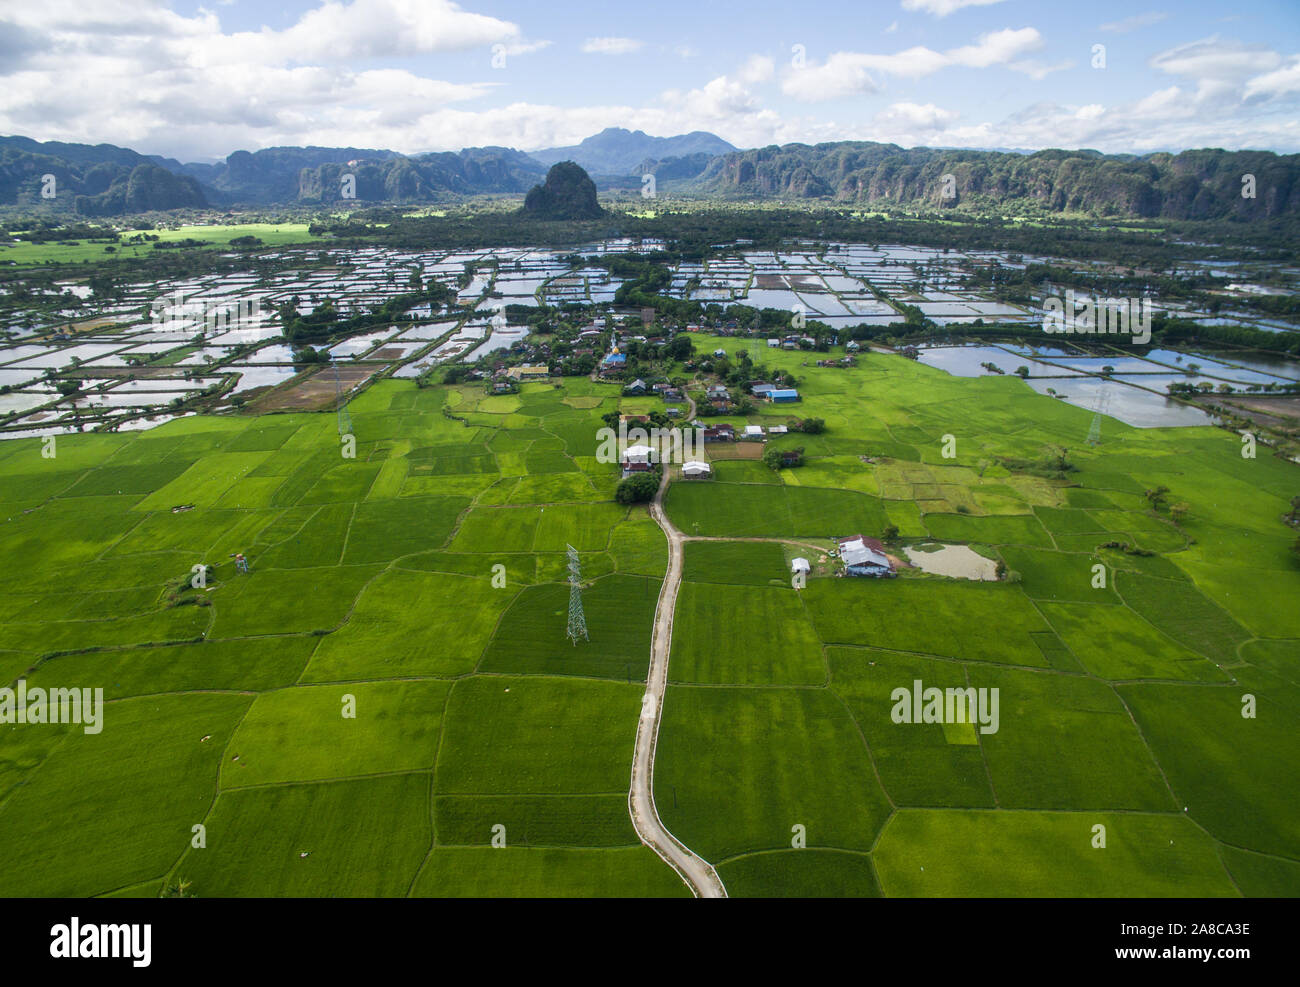 Rammang Rammang and the Rice field in the foreground in Maros - South Sulawesi Indonesia. Stock Photo